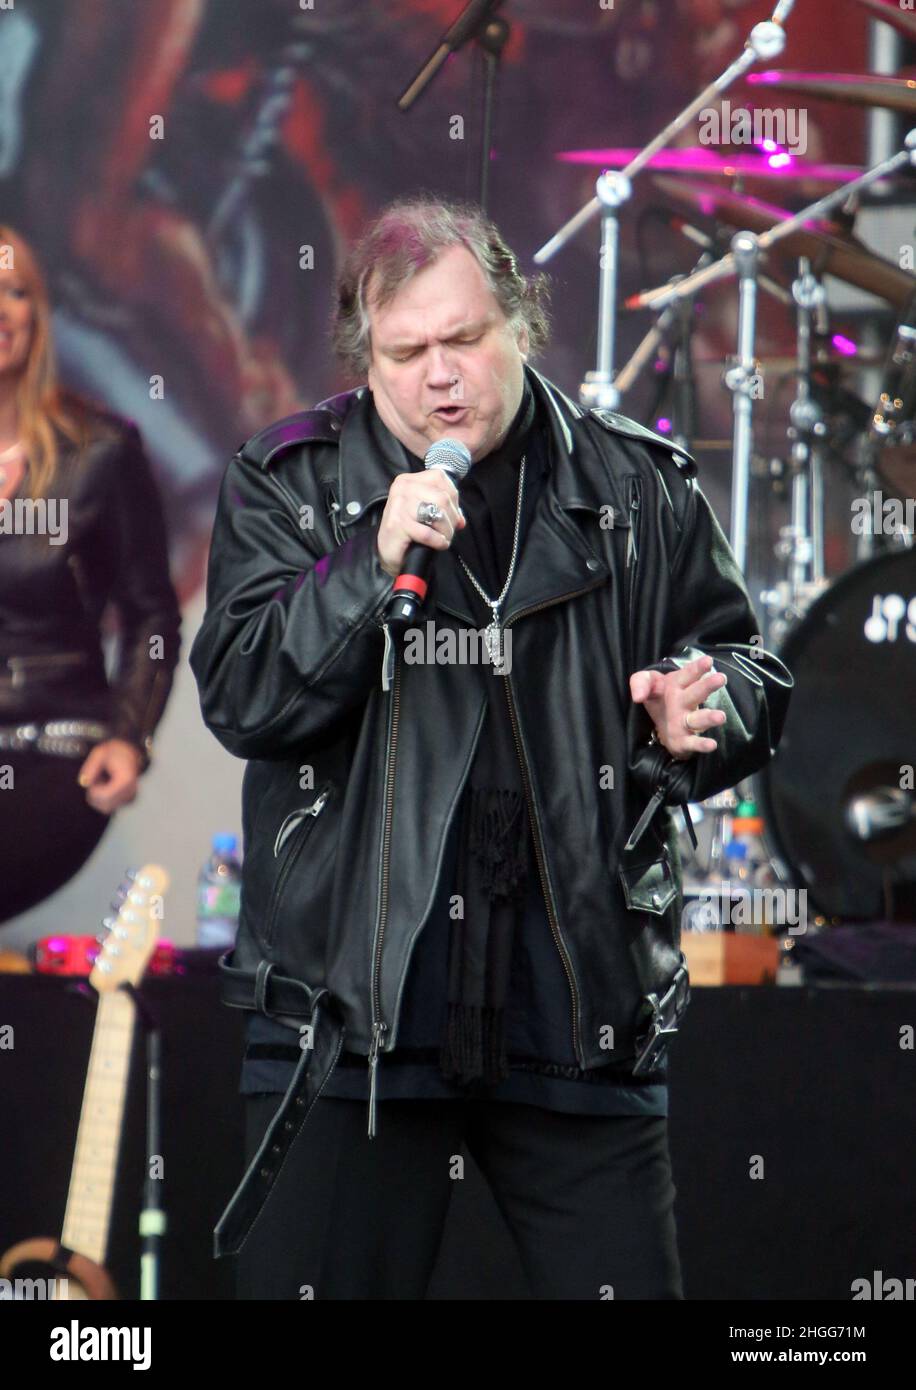 File photo dated 17/08/13 of Meat Loaf performing at Newbury Racecourse, Newbury. US singer Meat Loaf, whose hits included Bat Out of Hell, has died aged 74, a statement on his official Facebook page said. Issue date: Friday January 21, 2022. Stock Photo